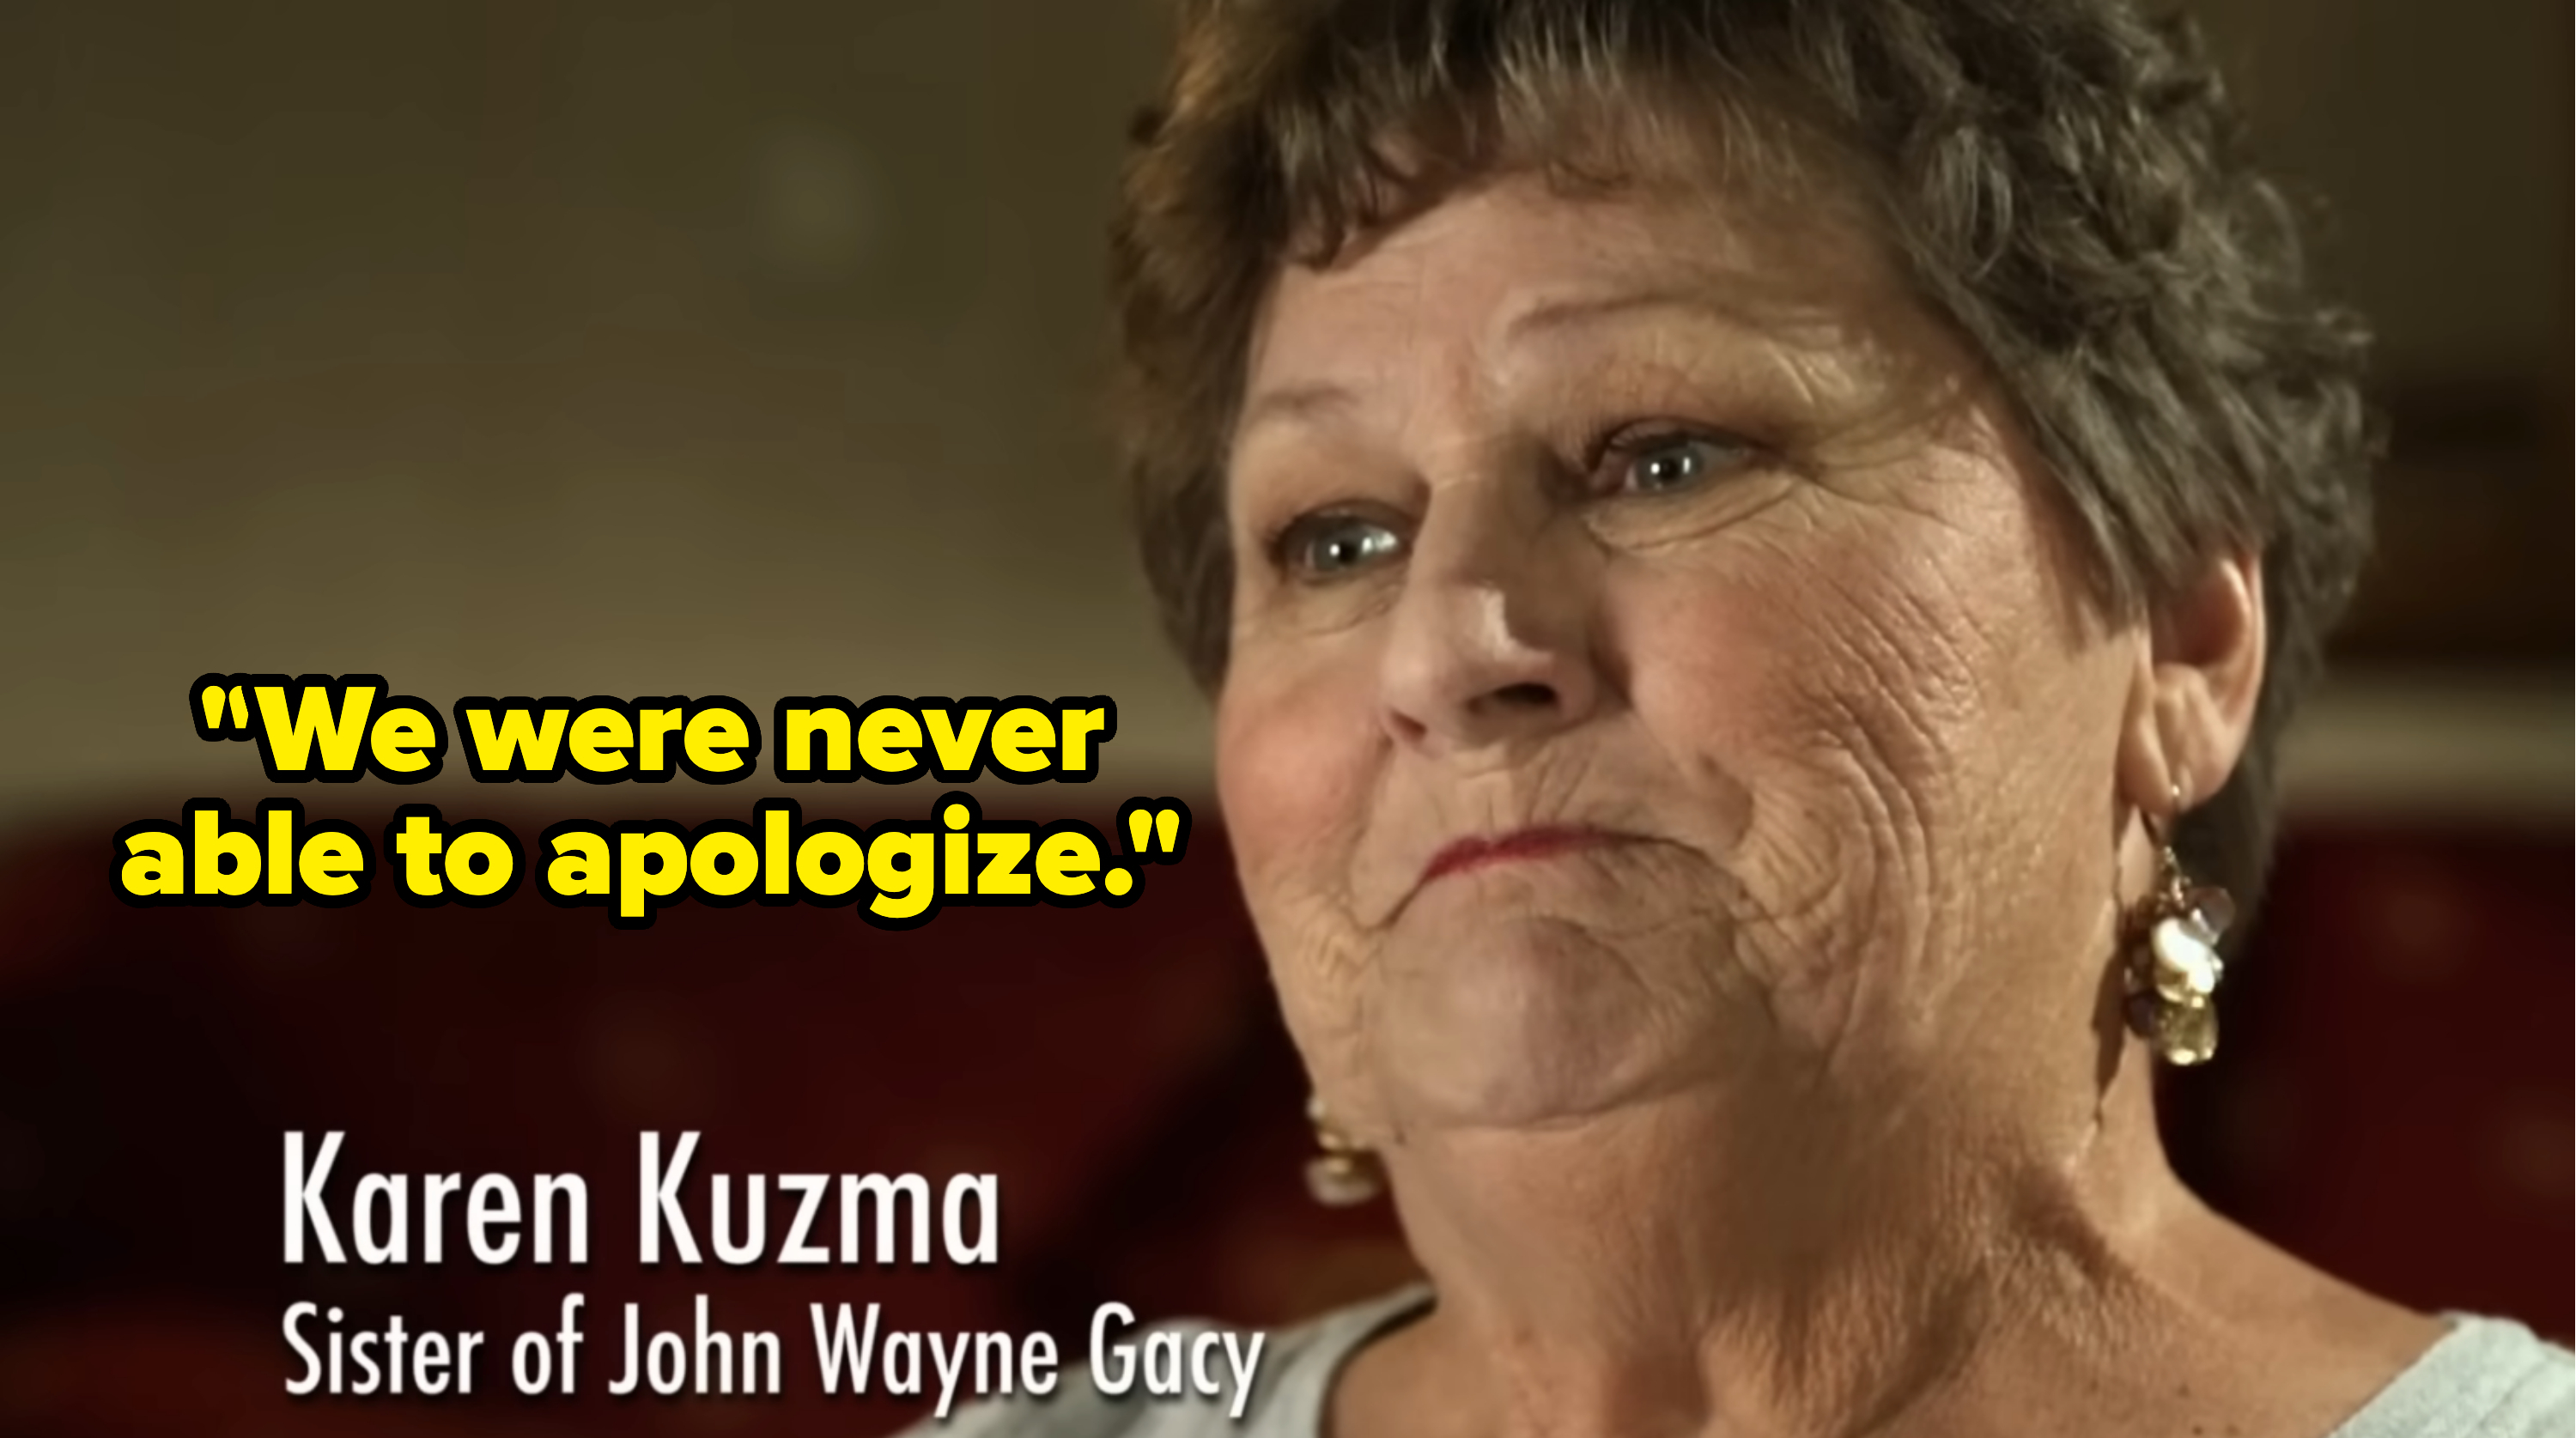 &quot;We were never able to apologize,&quot; says Karen Kuzma